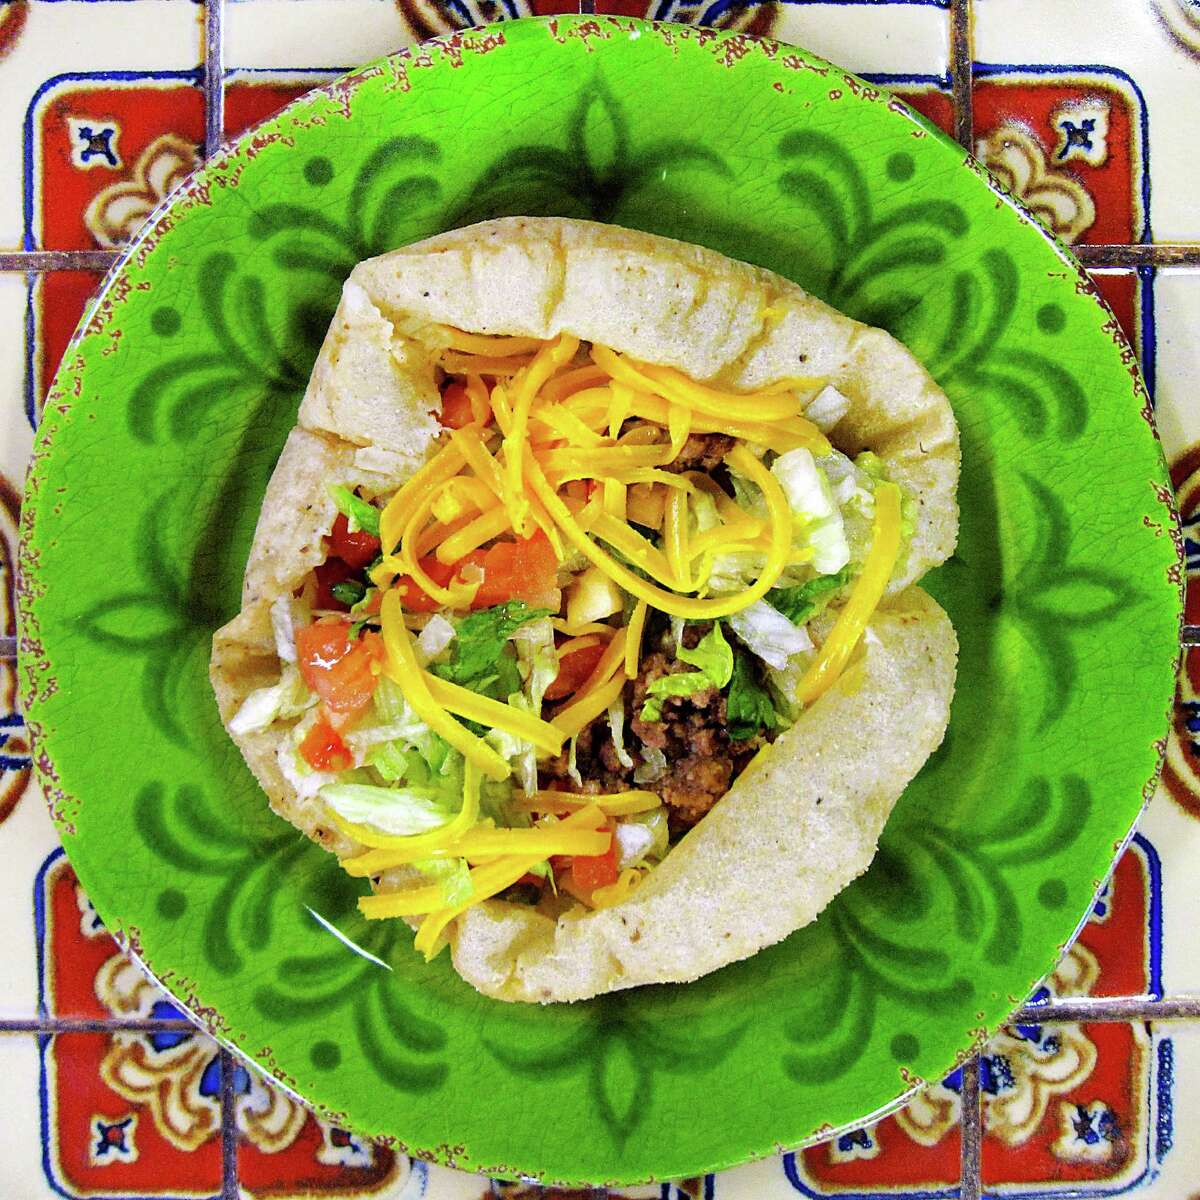 Netflix featured local restaurant Teka Molino in its season 2 series of "Taco Chronicles" during the episode named "American Taco."